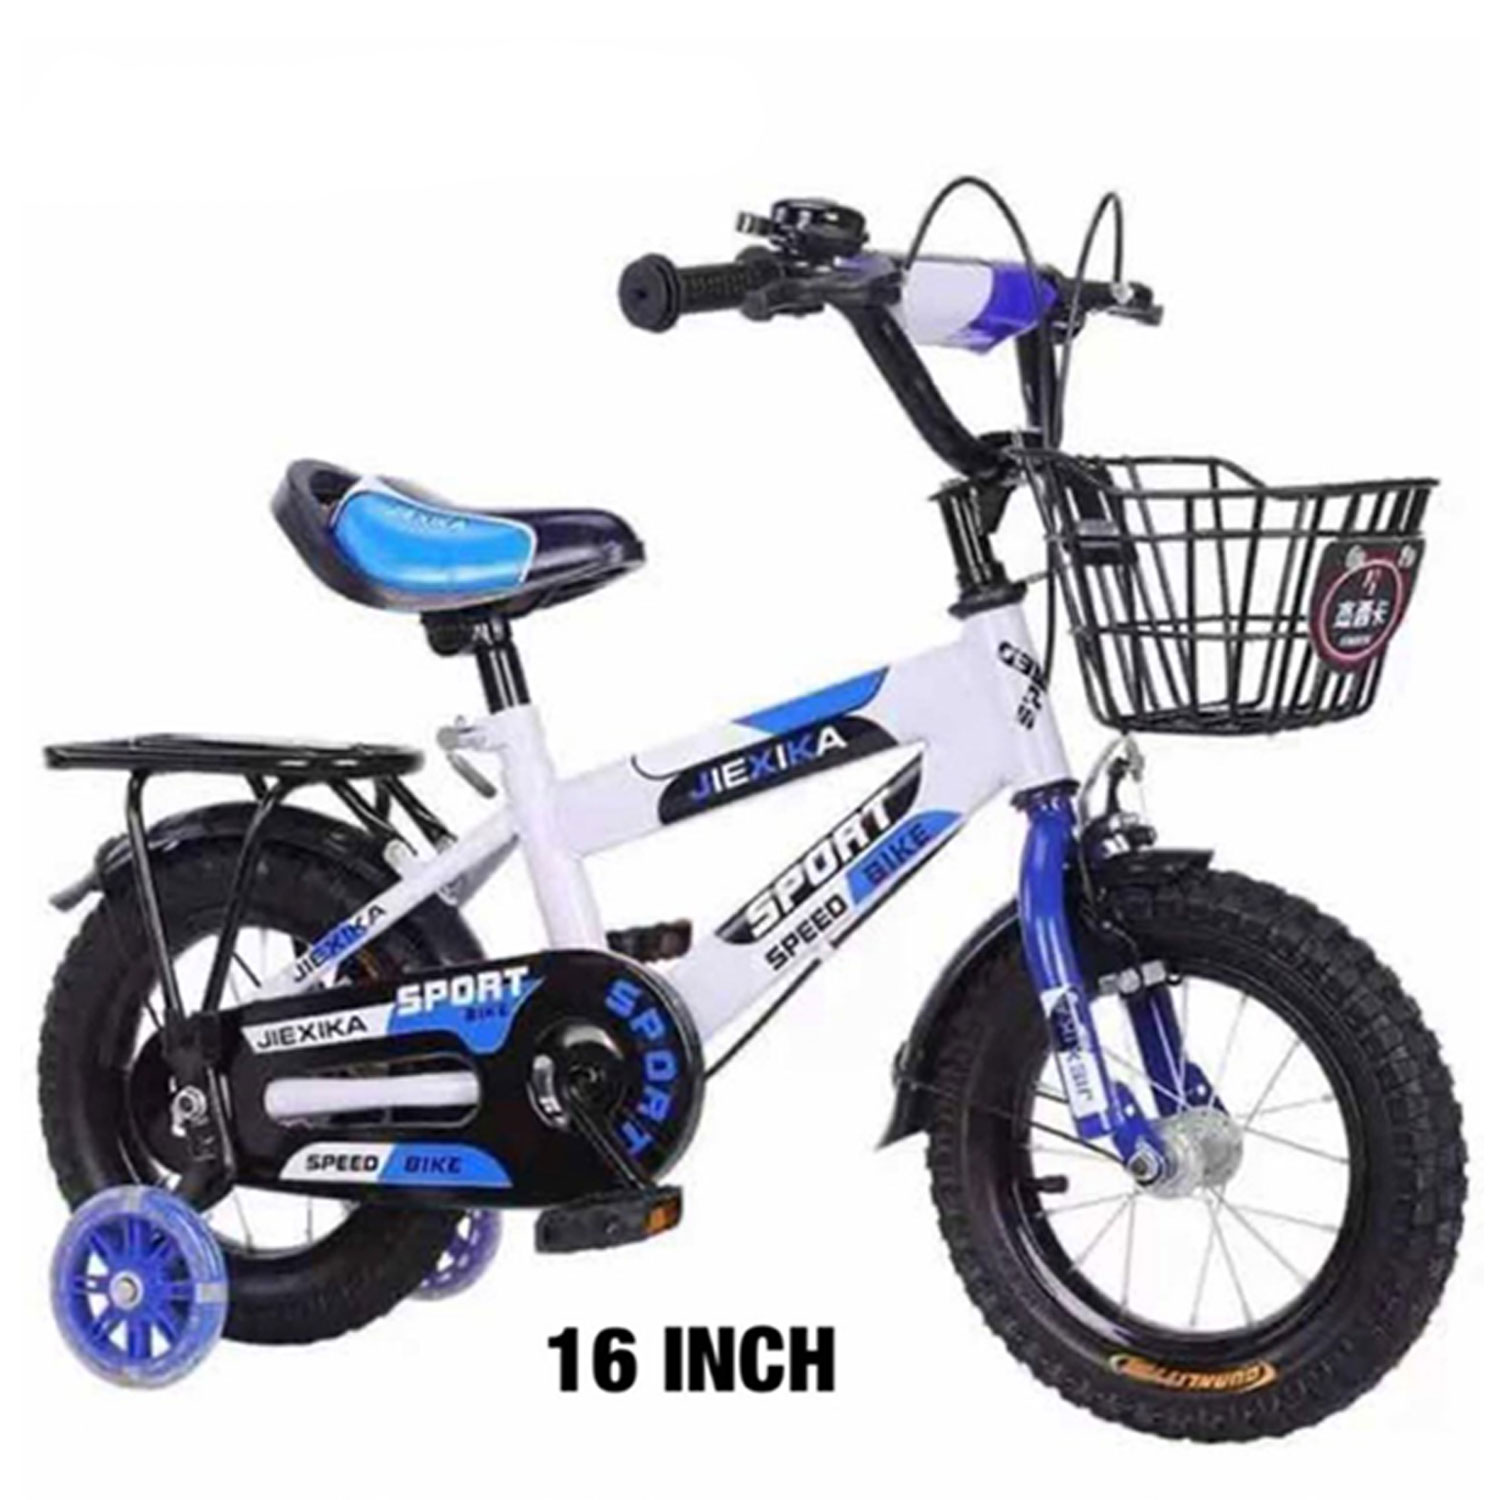 Cycle for Kids | Bike for Boys and Girls |White - Blue MD-427 (16" inch)